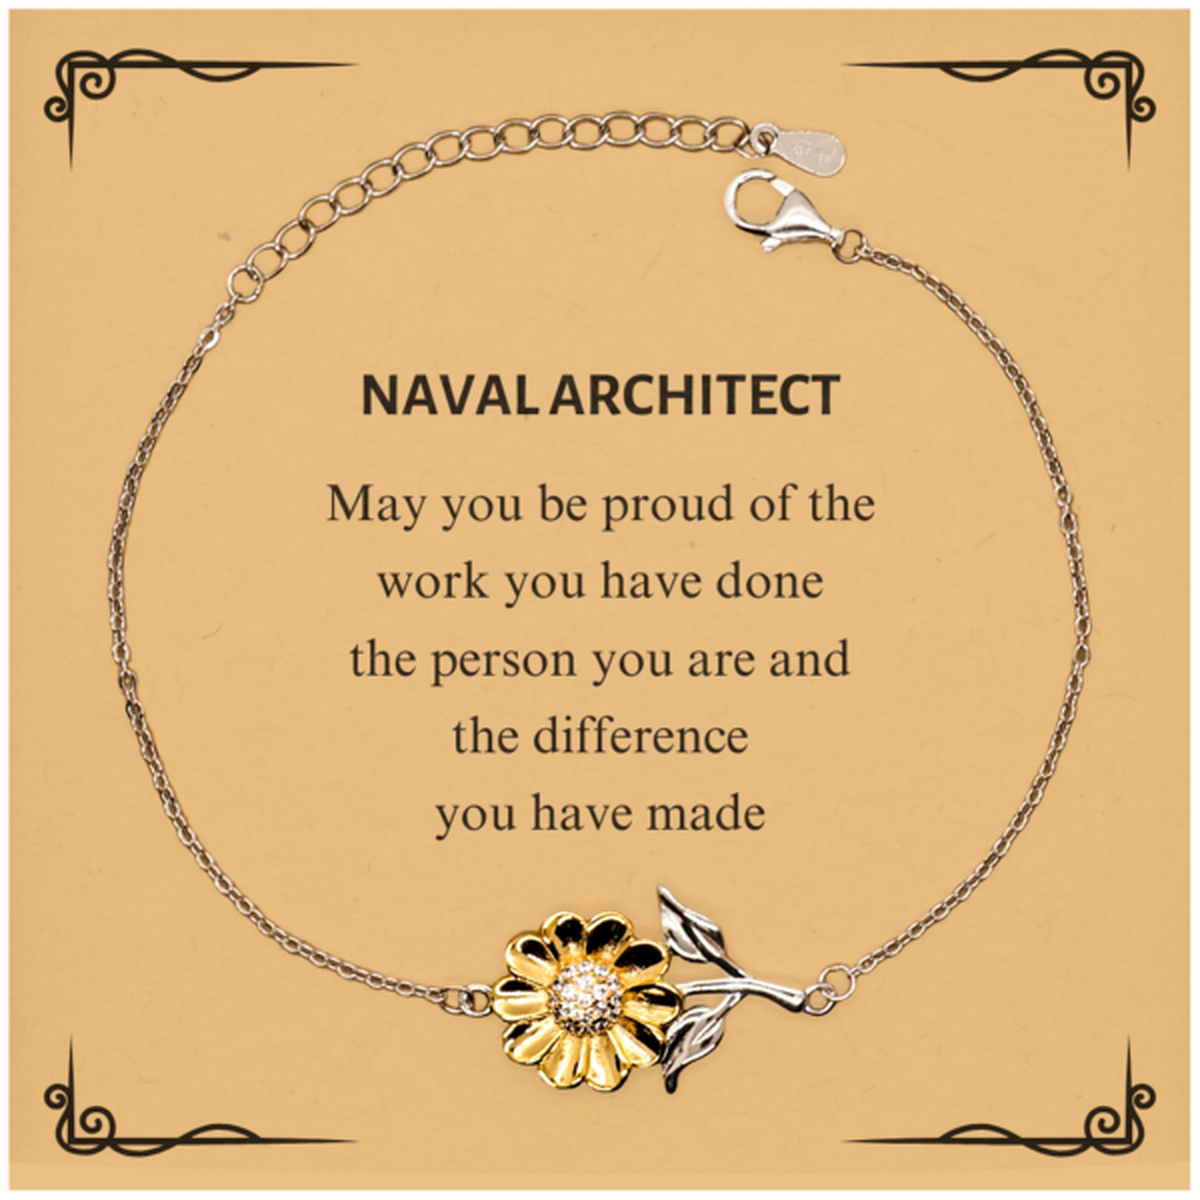 Naval Architect May you be proud of the work you have done, Retirement Naval Architect Sunflower Bracelet for Colleague Appreciation Gifts Amazing for Naval Architect